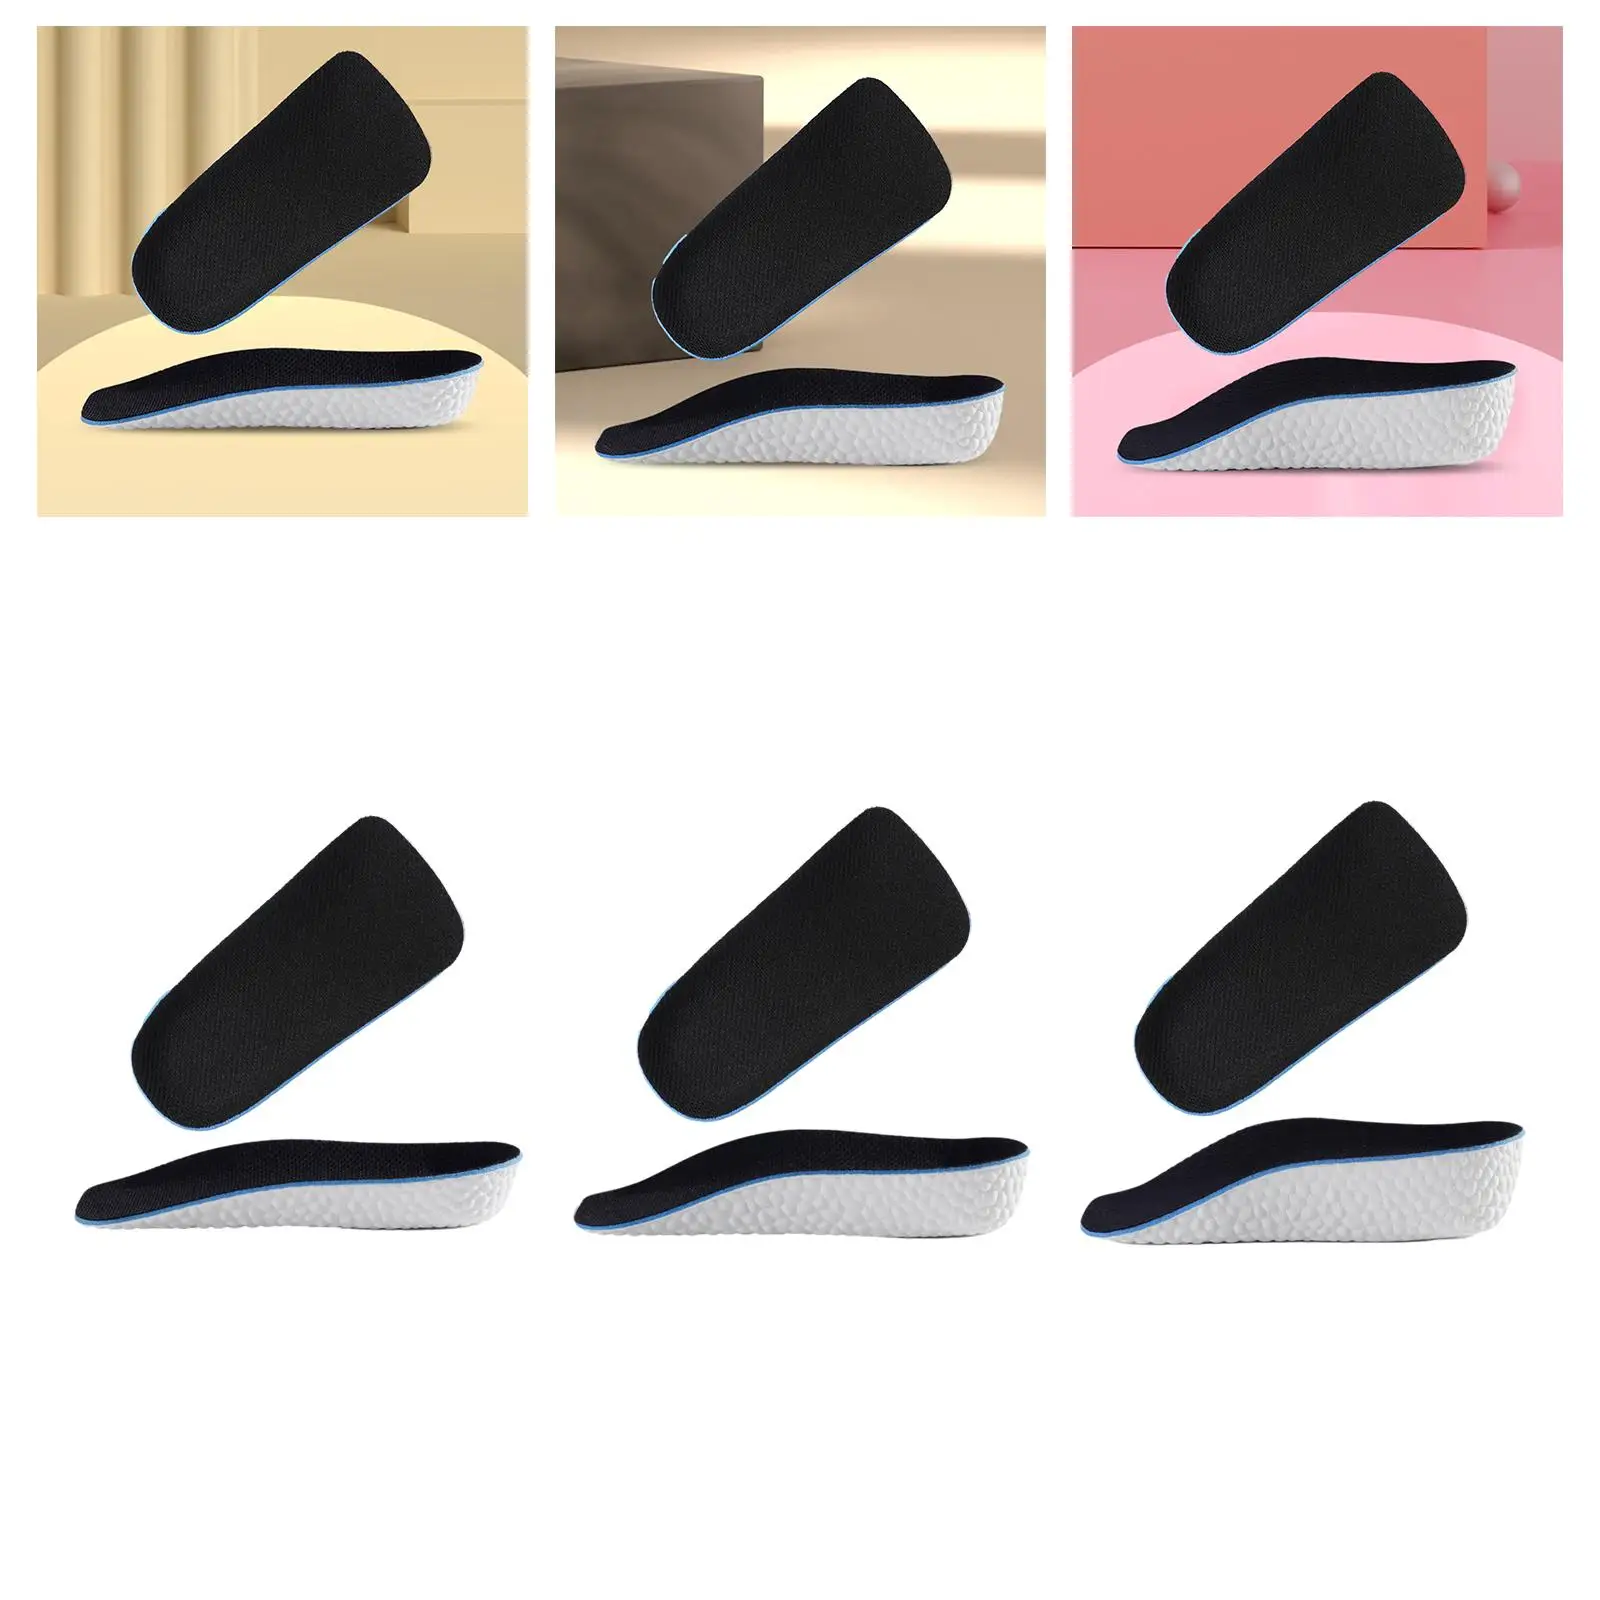 2Pcs Height Increase Insoles Shock Absorption Soft Non Slip Heel Lifts Cushion Pads for Running High Heels Walking Hiking Boots